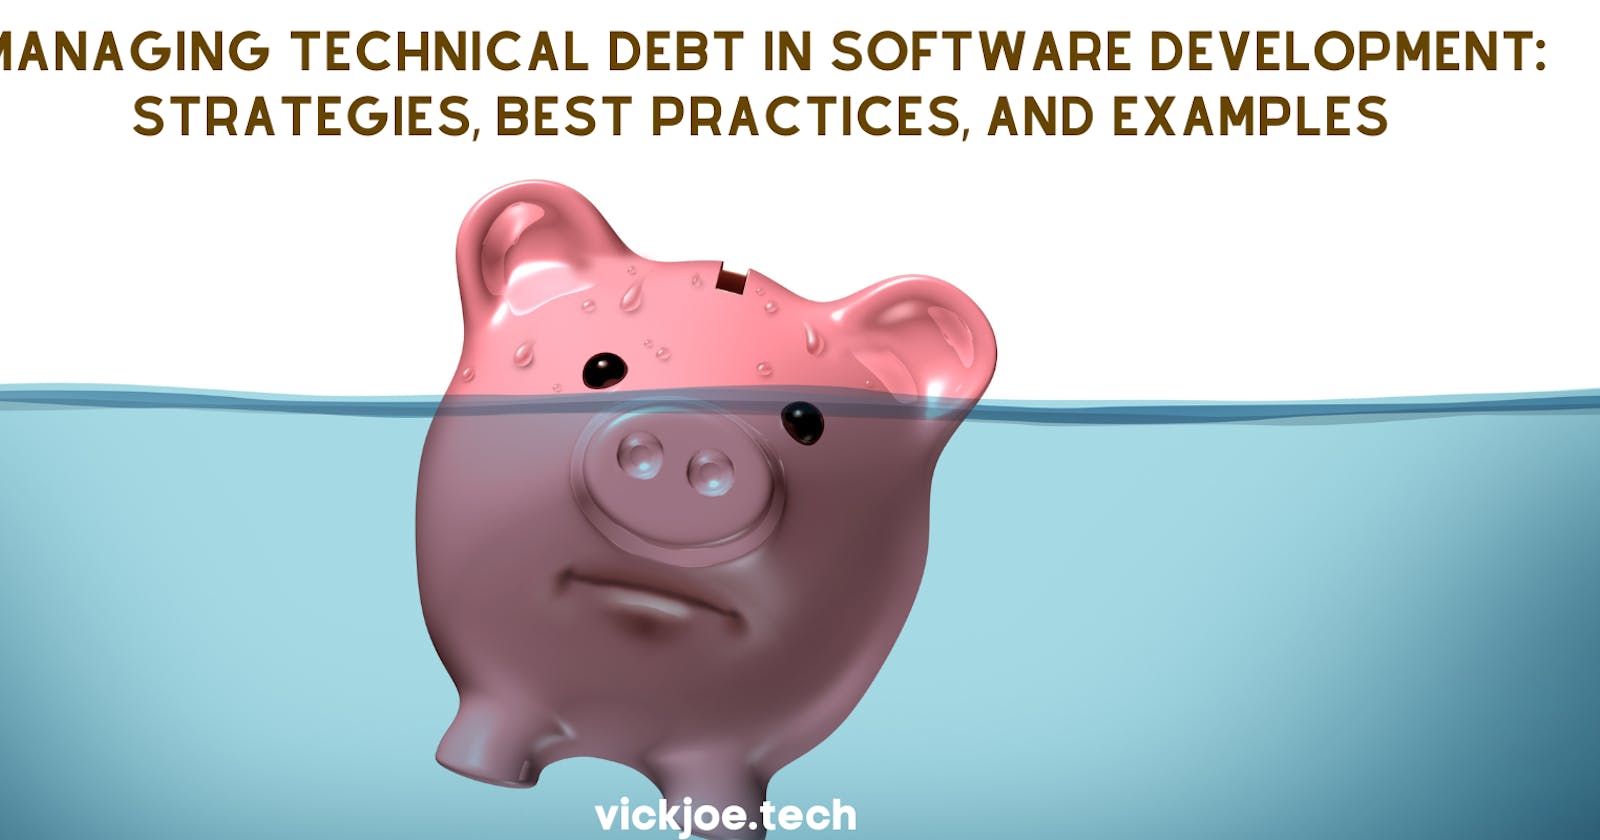 Managing Technical Debt in Software Development: Strategies, Best Practices, and Examples